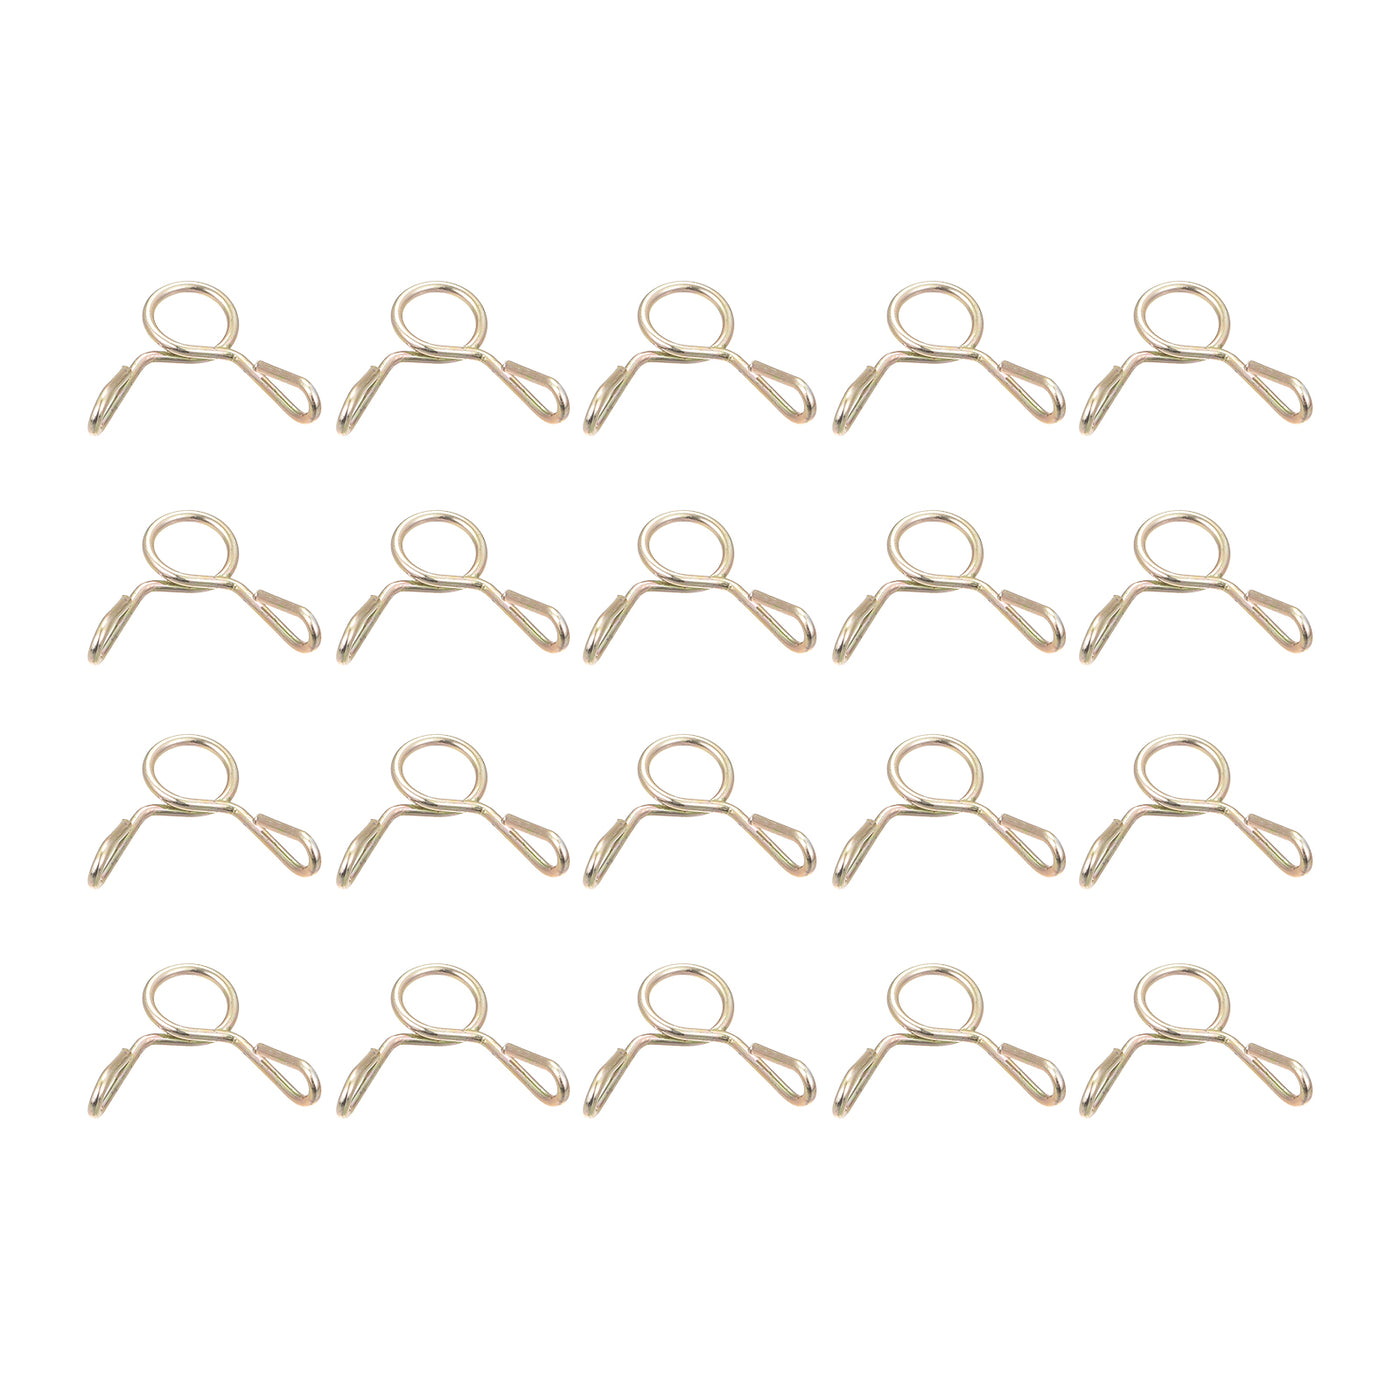 Uxcell Uxcell Fuel Line Hose Clips, 100pcs 12mm 65Mn Steel Tubing Spring Clamps